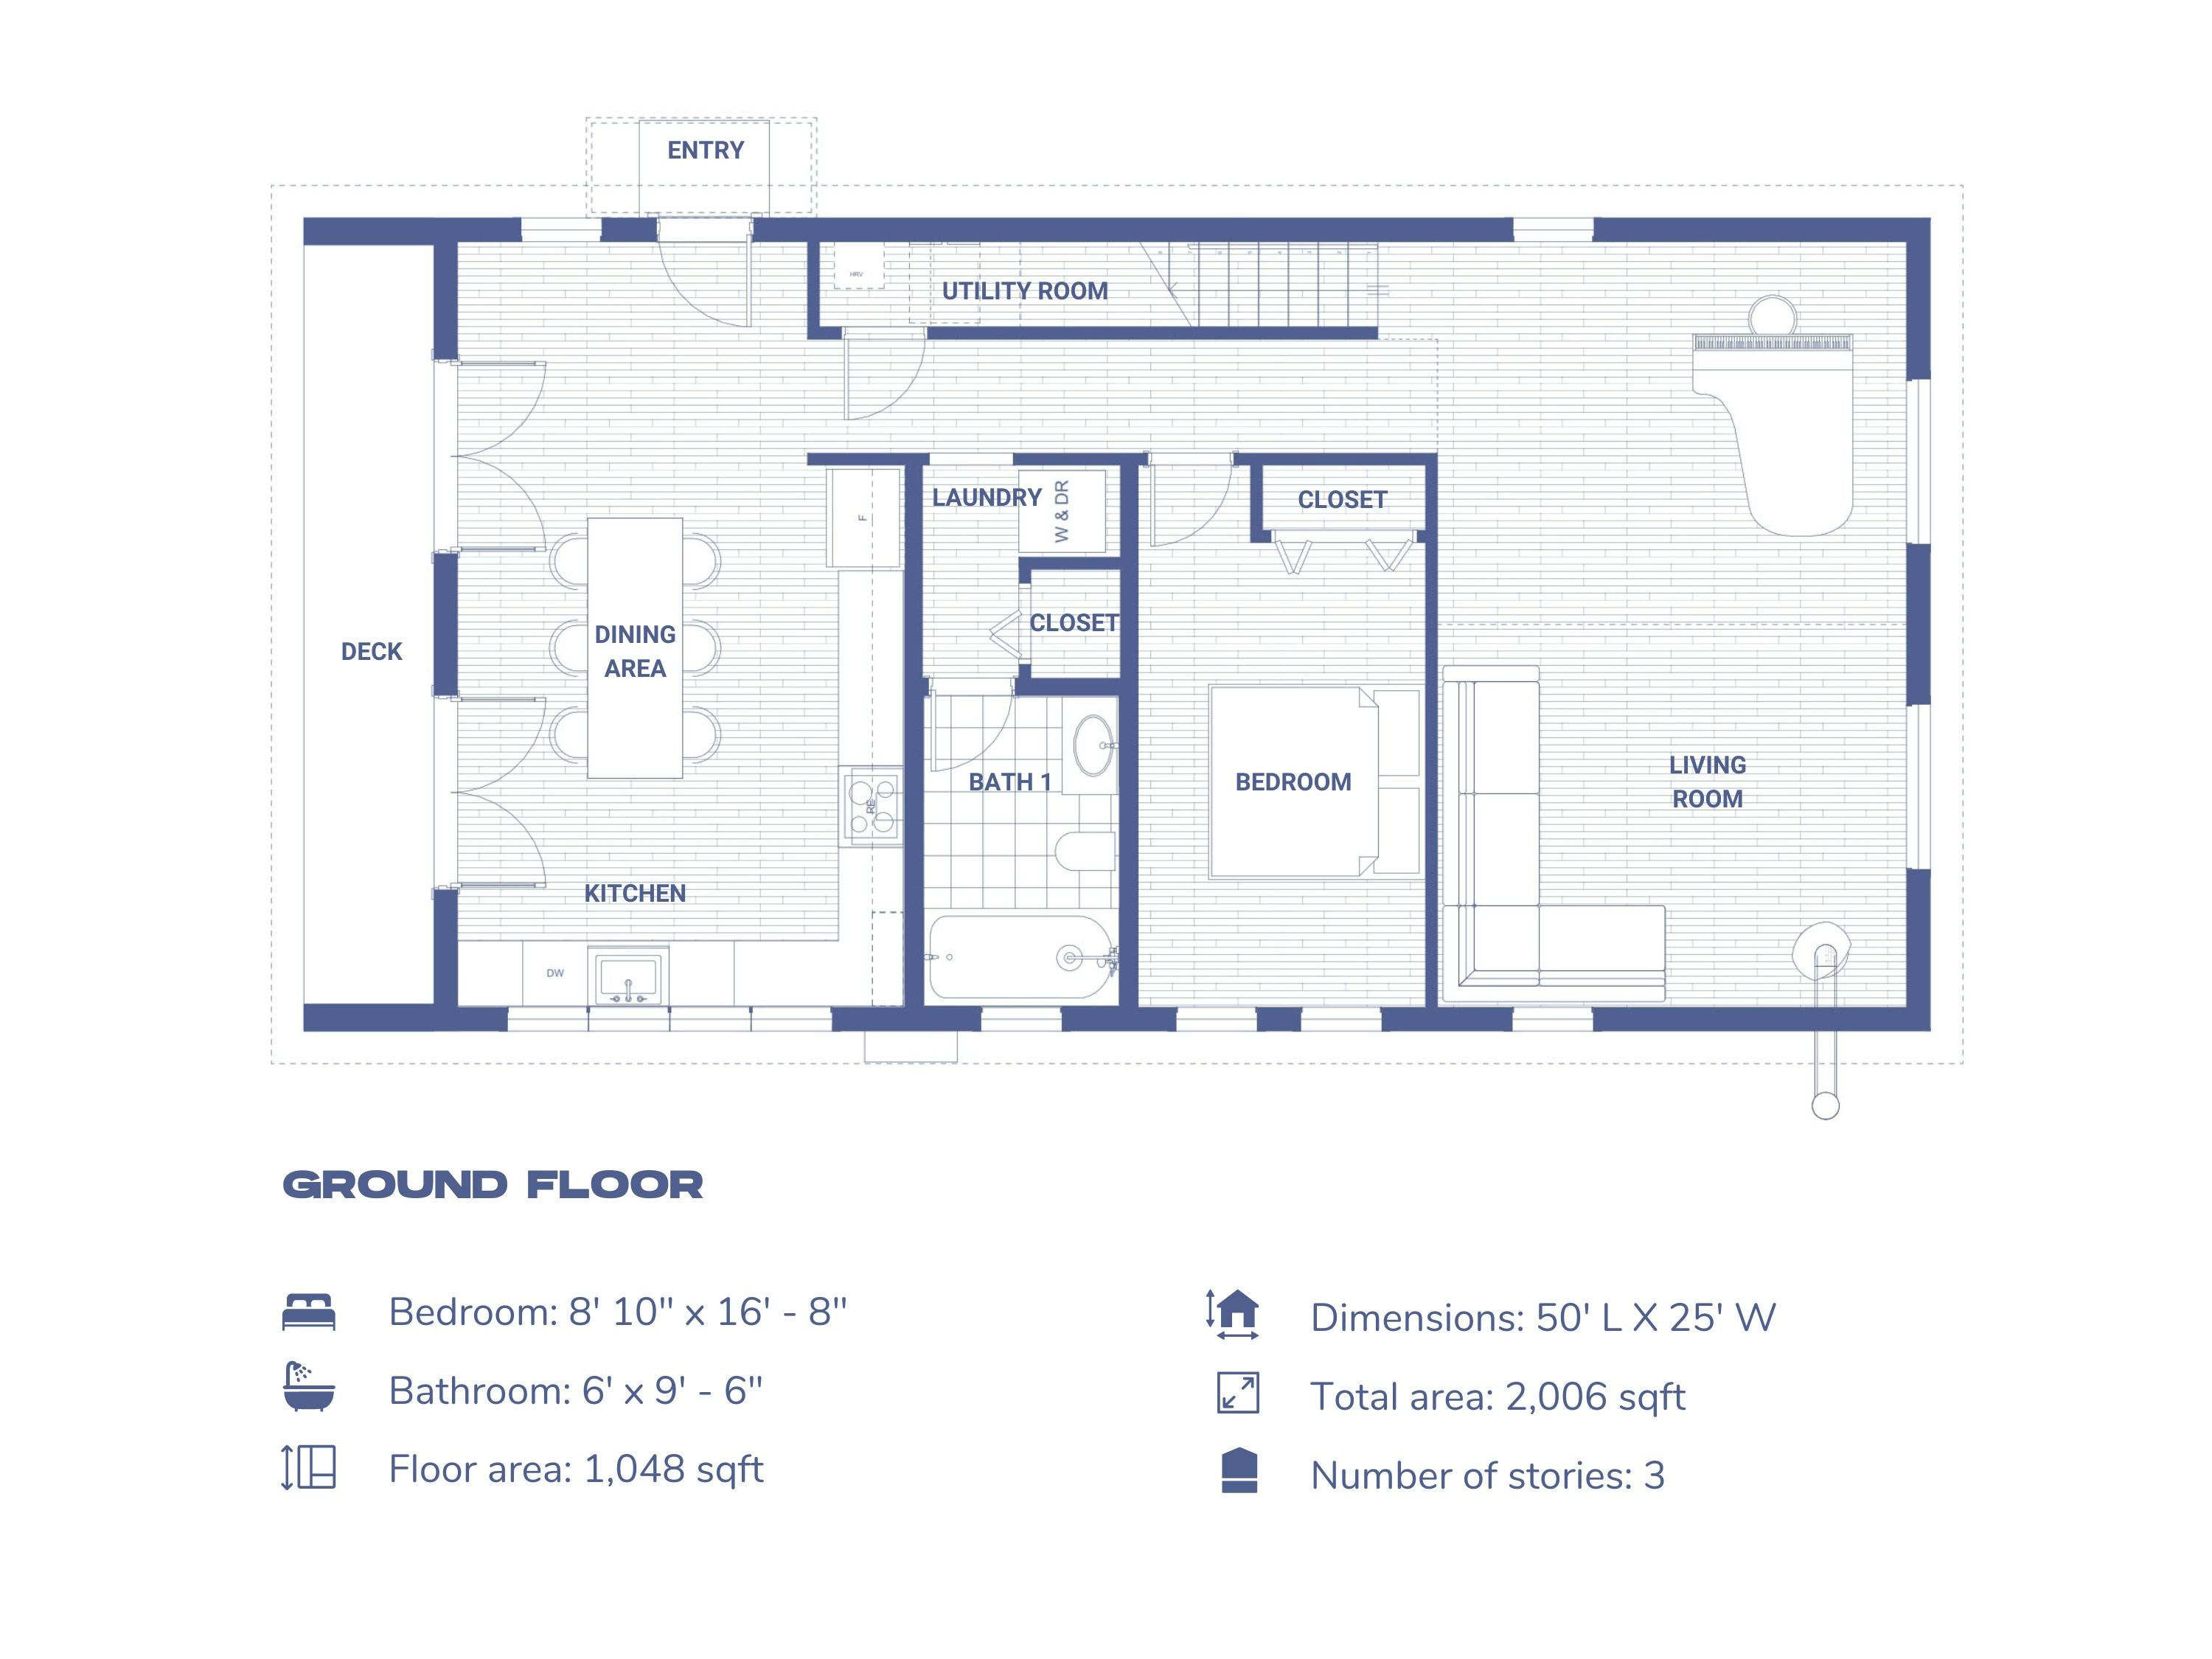 Ground floorplan of skyloft . ground floor includes bedroom, living room, dining room and entry